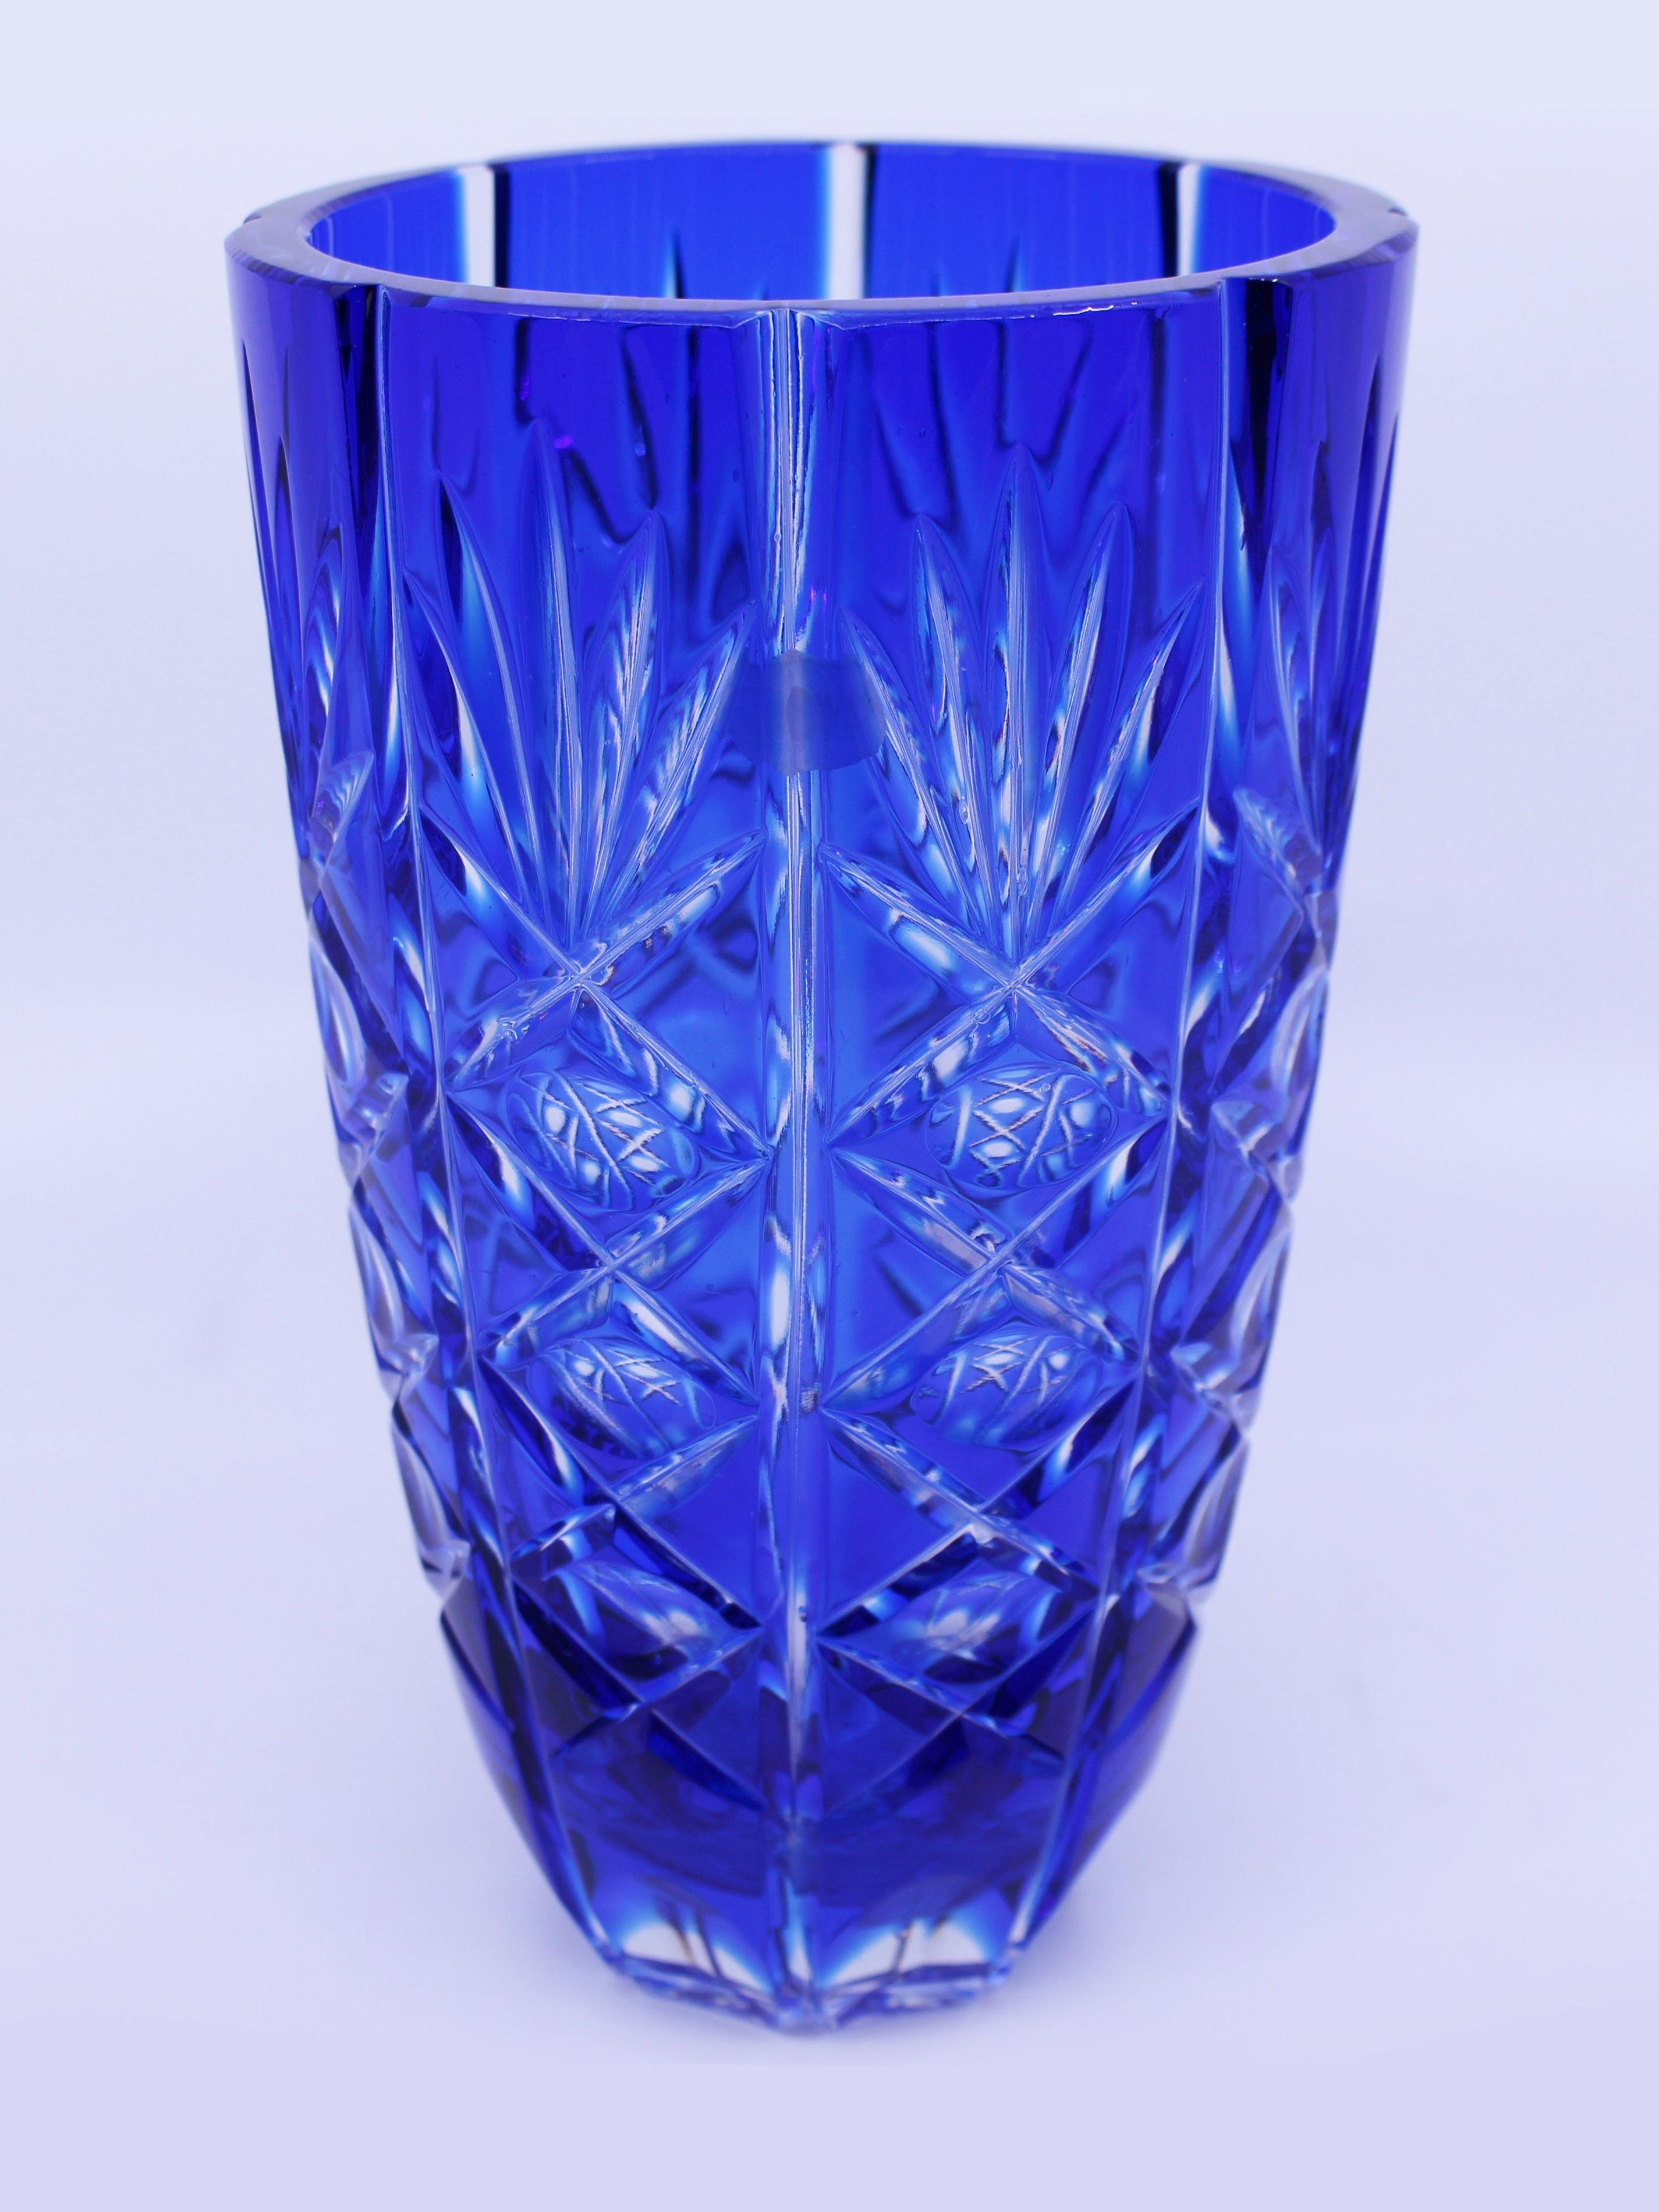 Period:
mid-late 20th century

Origin:
Stourbridge, England

Composition:
Cut overlay crystal, blue

Condition:
Very good condition commensurate with age. No chips, cracks or repairs. Light scratches to base commensurate with age
 

